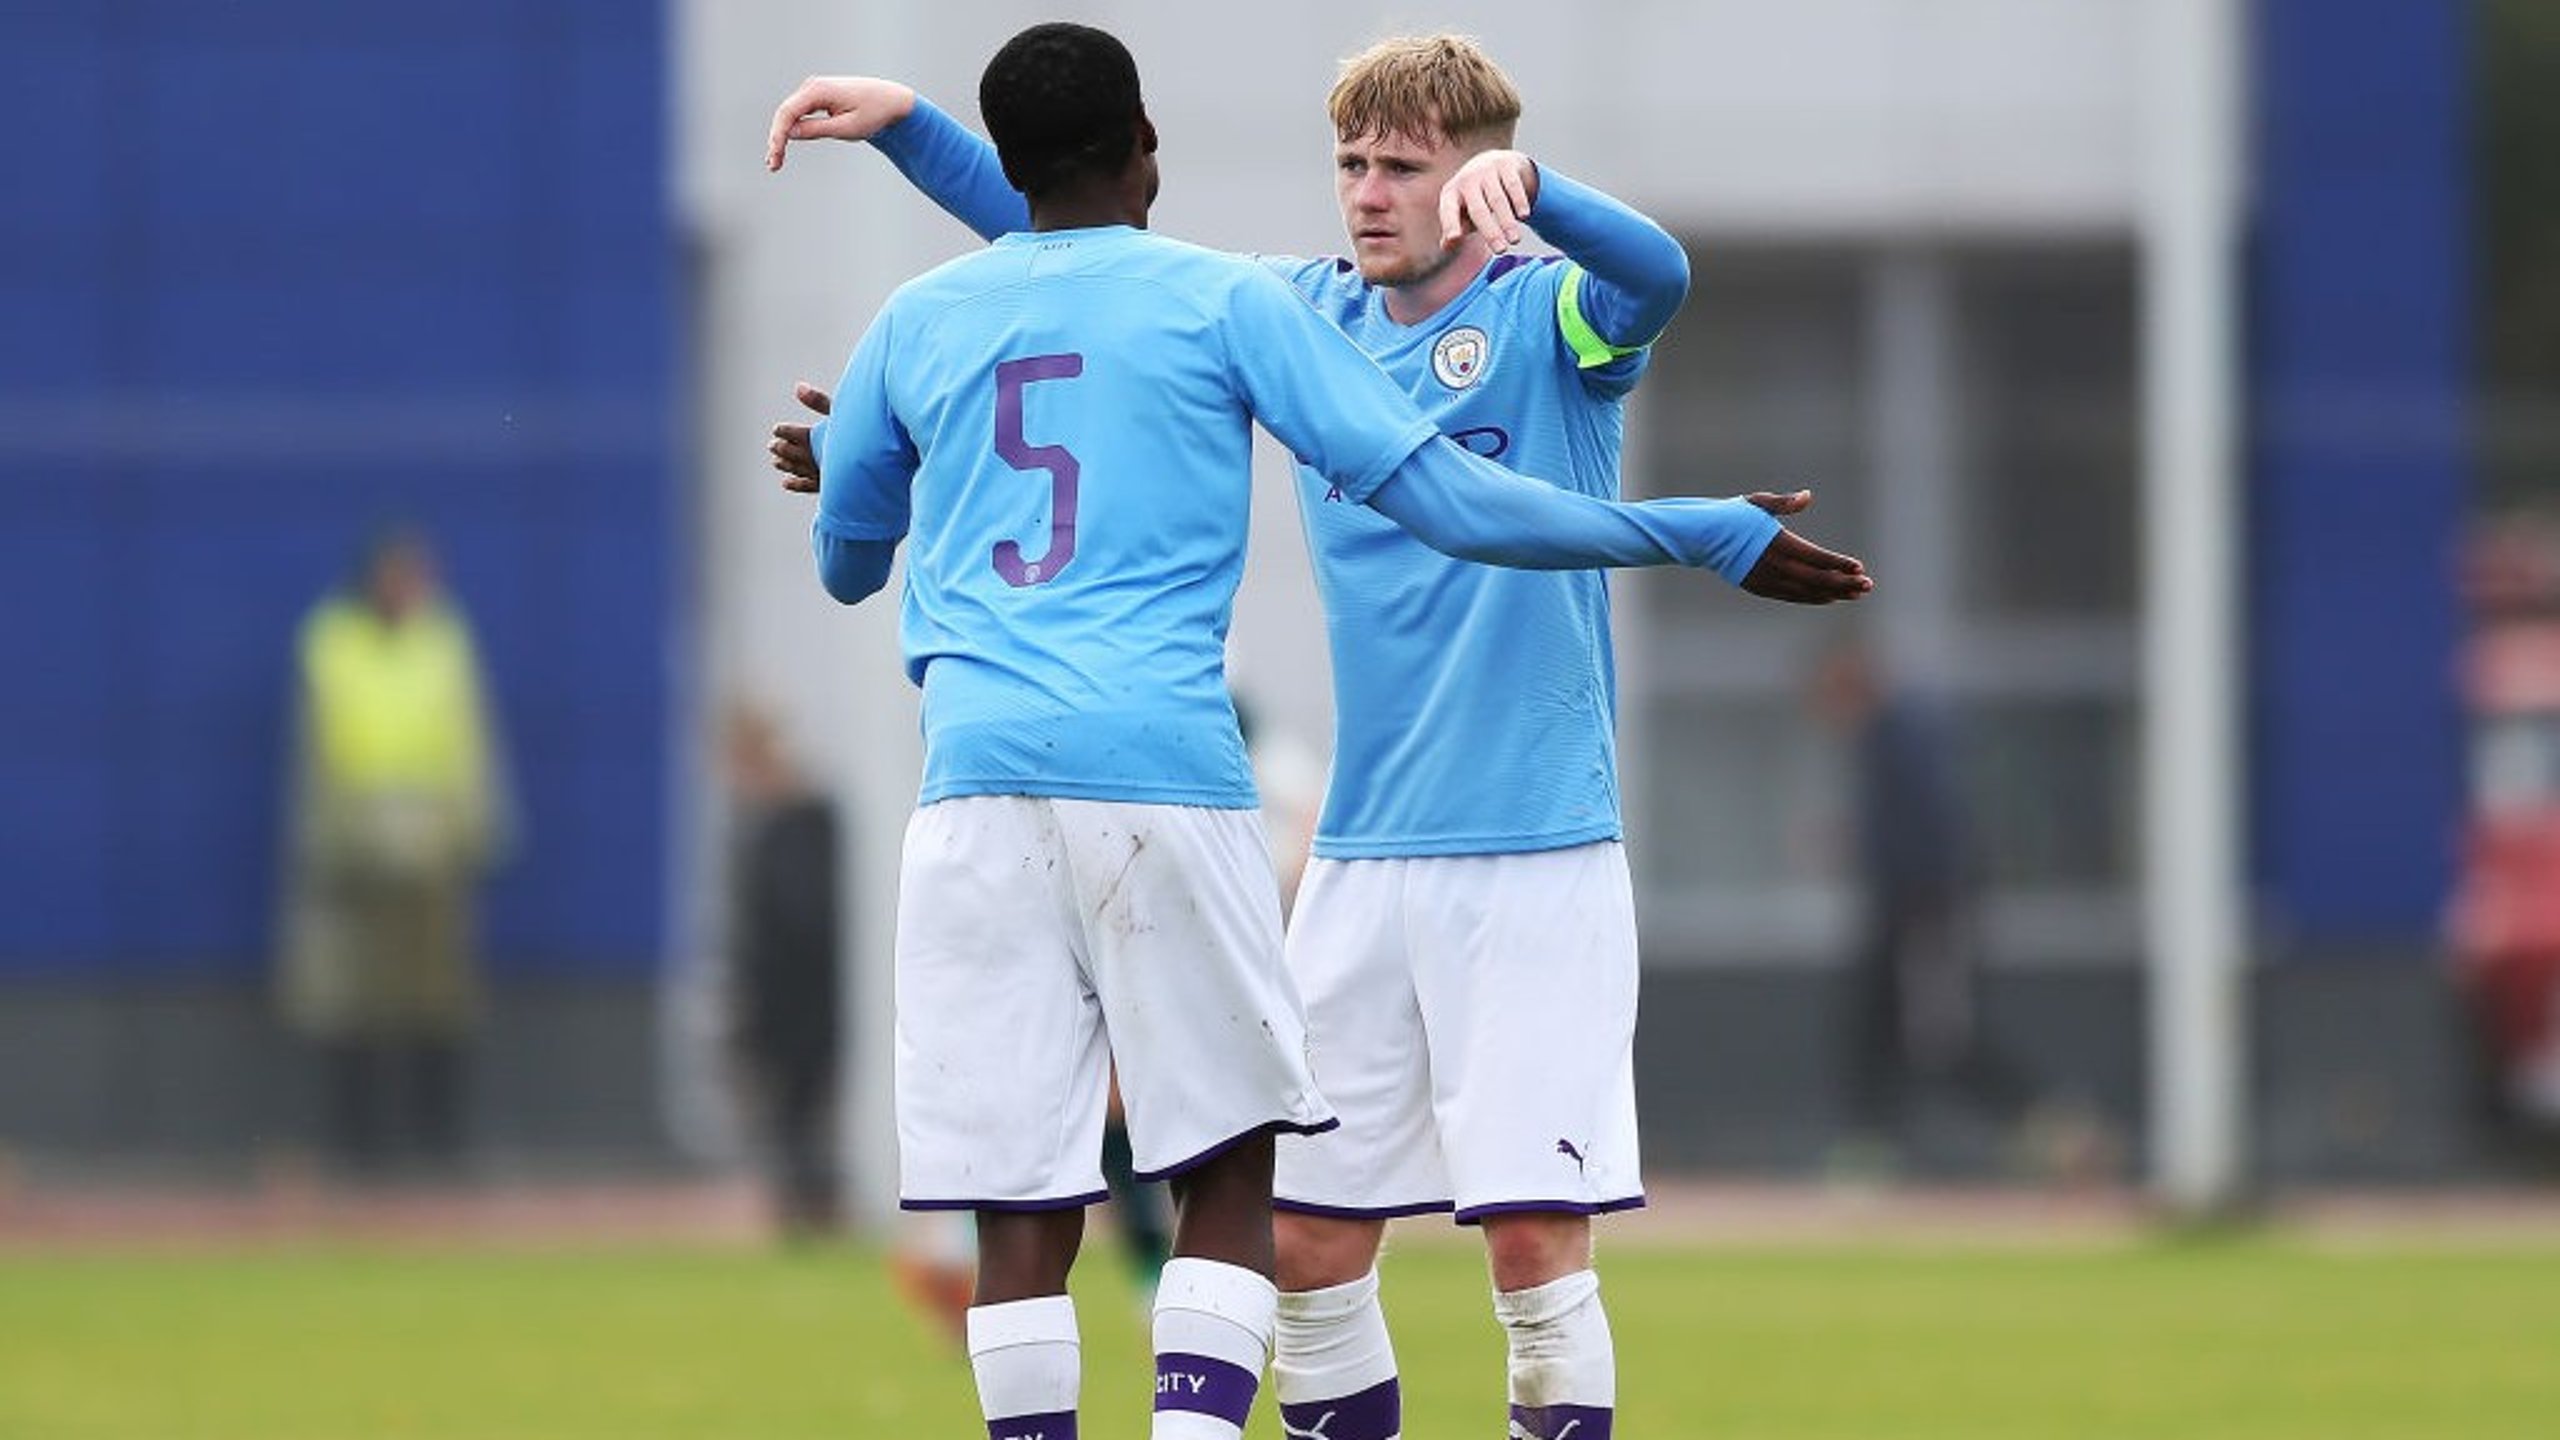 ON TARGET: Tommy Doyle scored his second goal in a week as the EDS draw 2-2 with Everton.